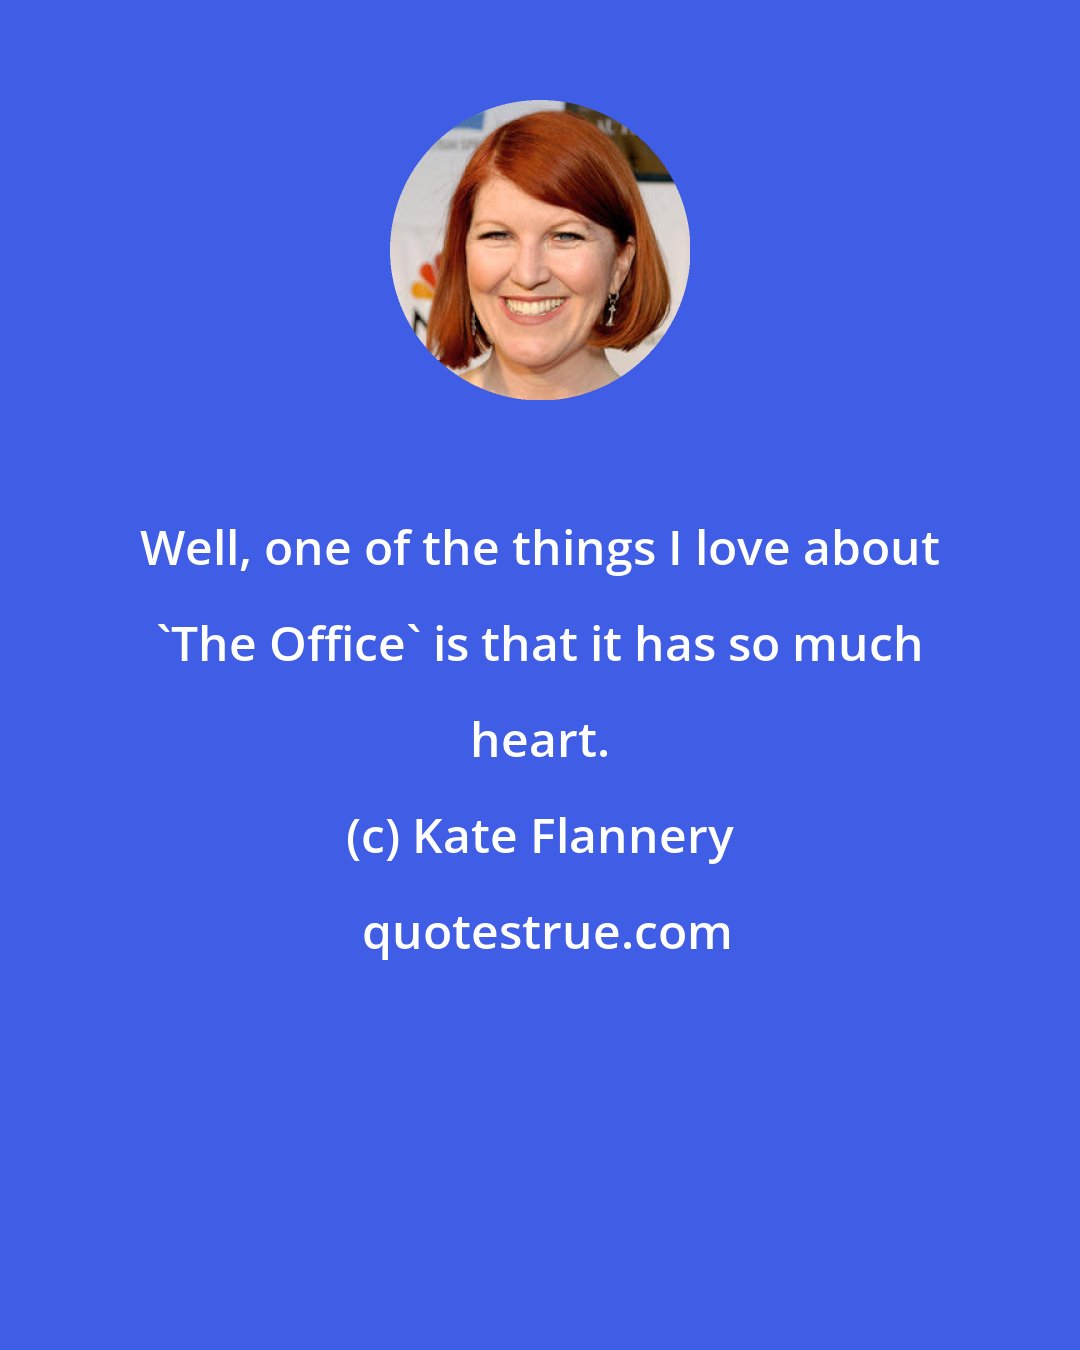 Kate Flannery: Well, one of the things I love about 'The Office' is that it has so much heart.